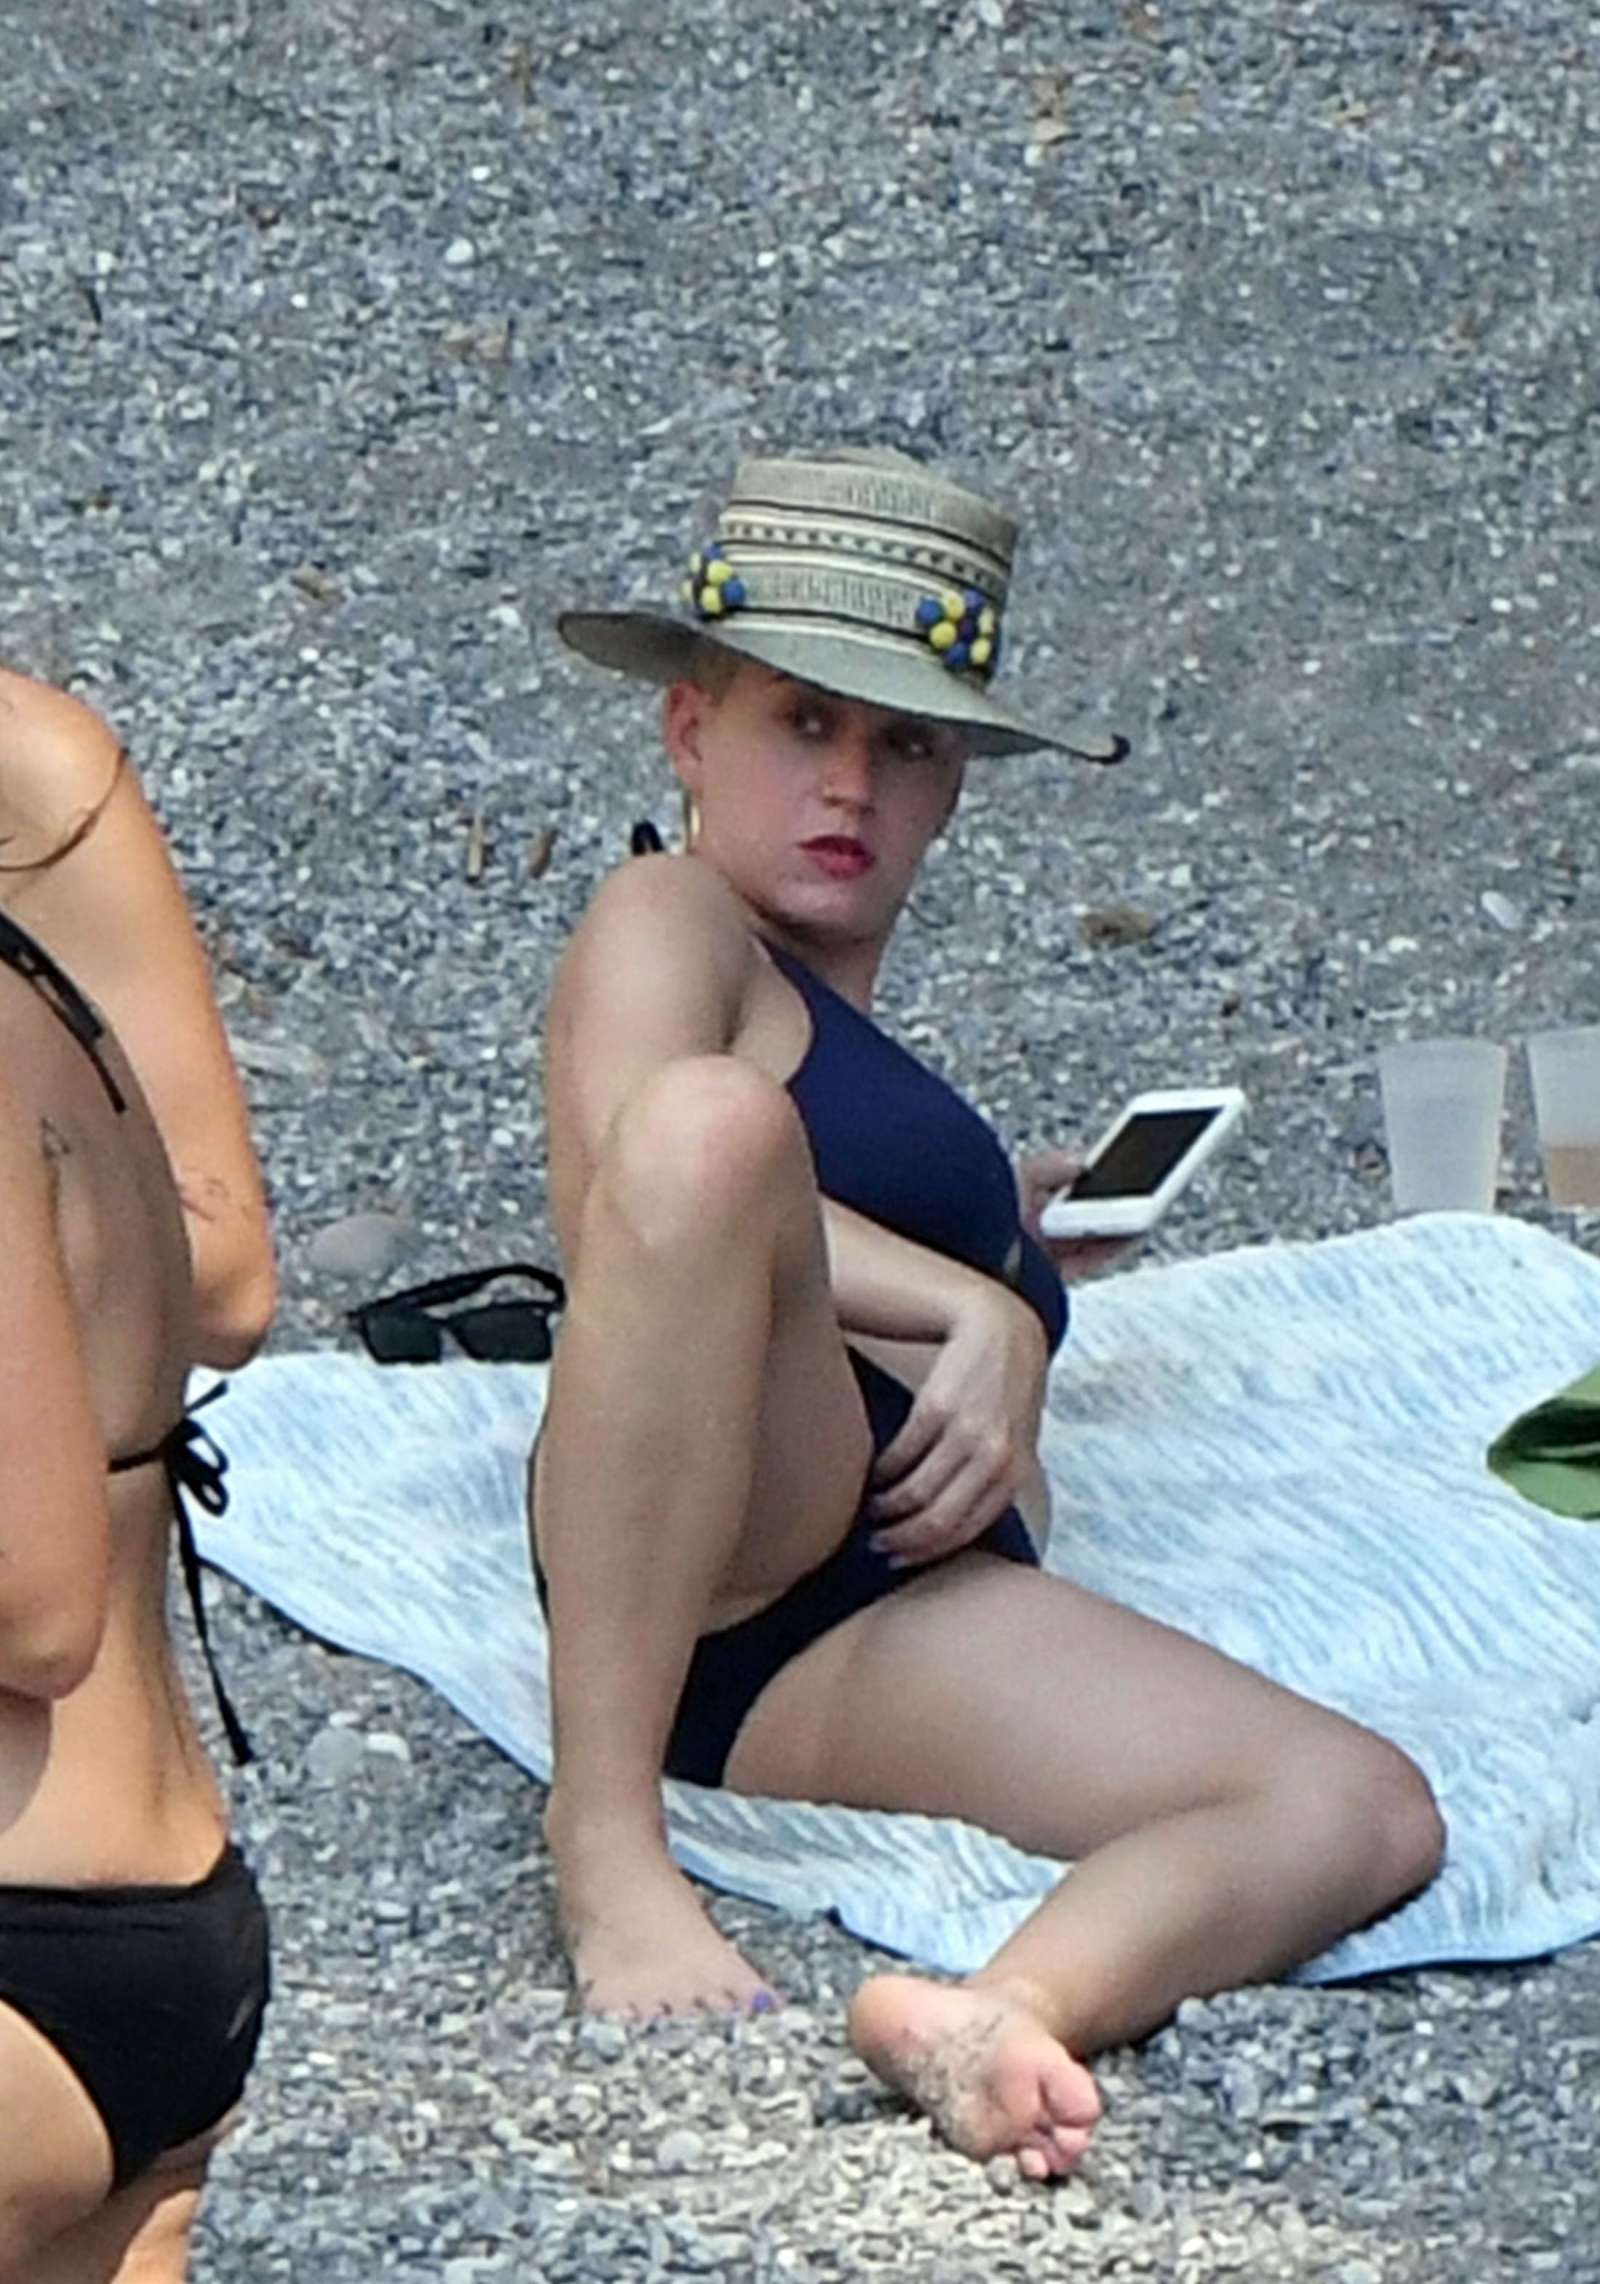 Katy Perry in Blue Bikini on vacation in Italy. 